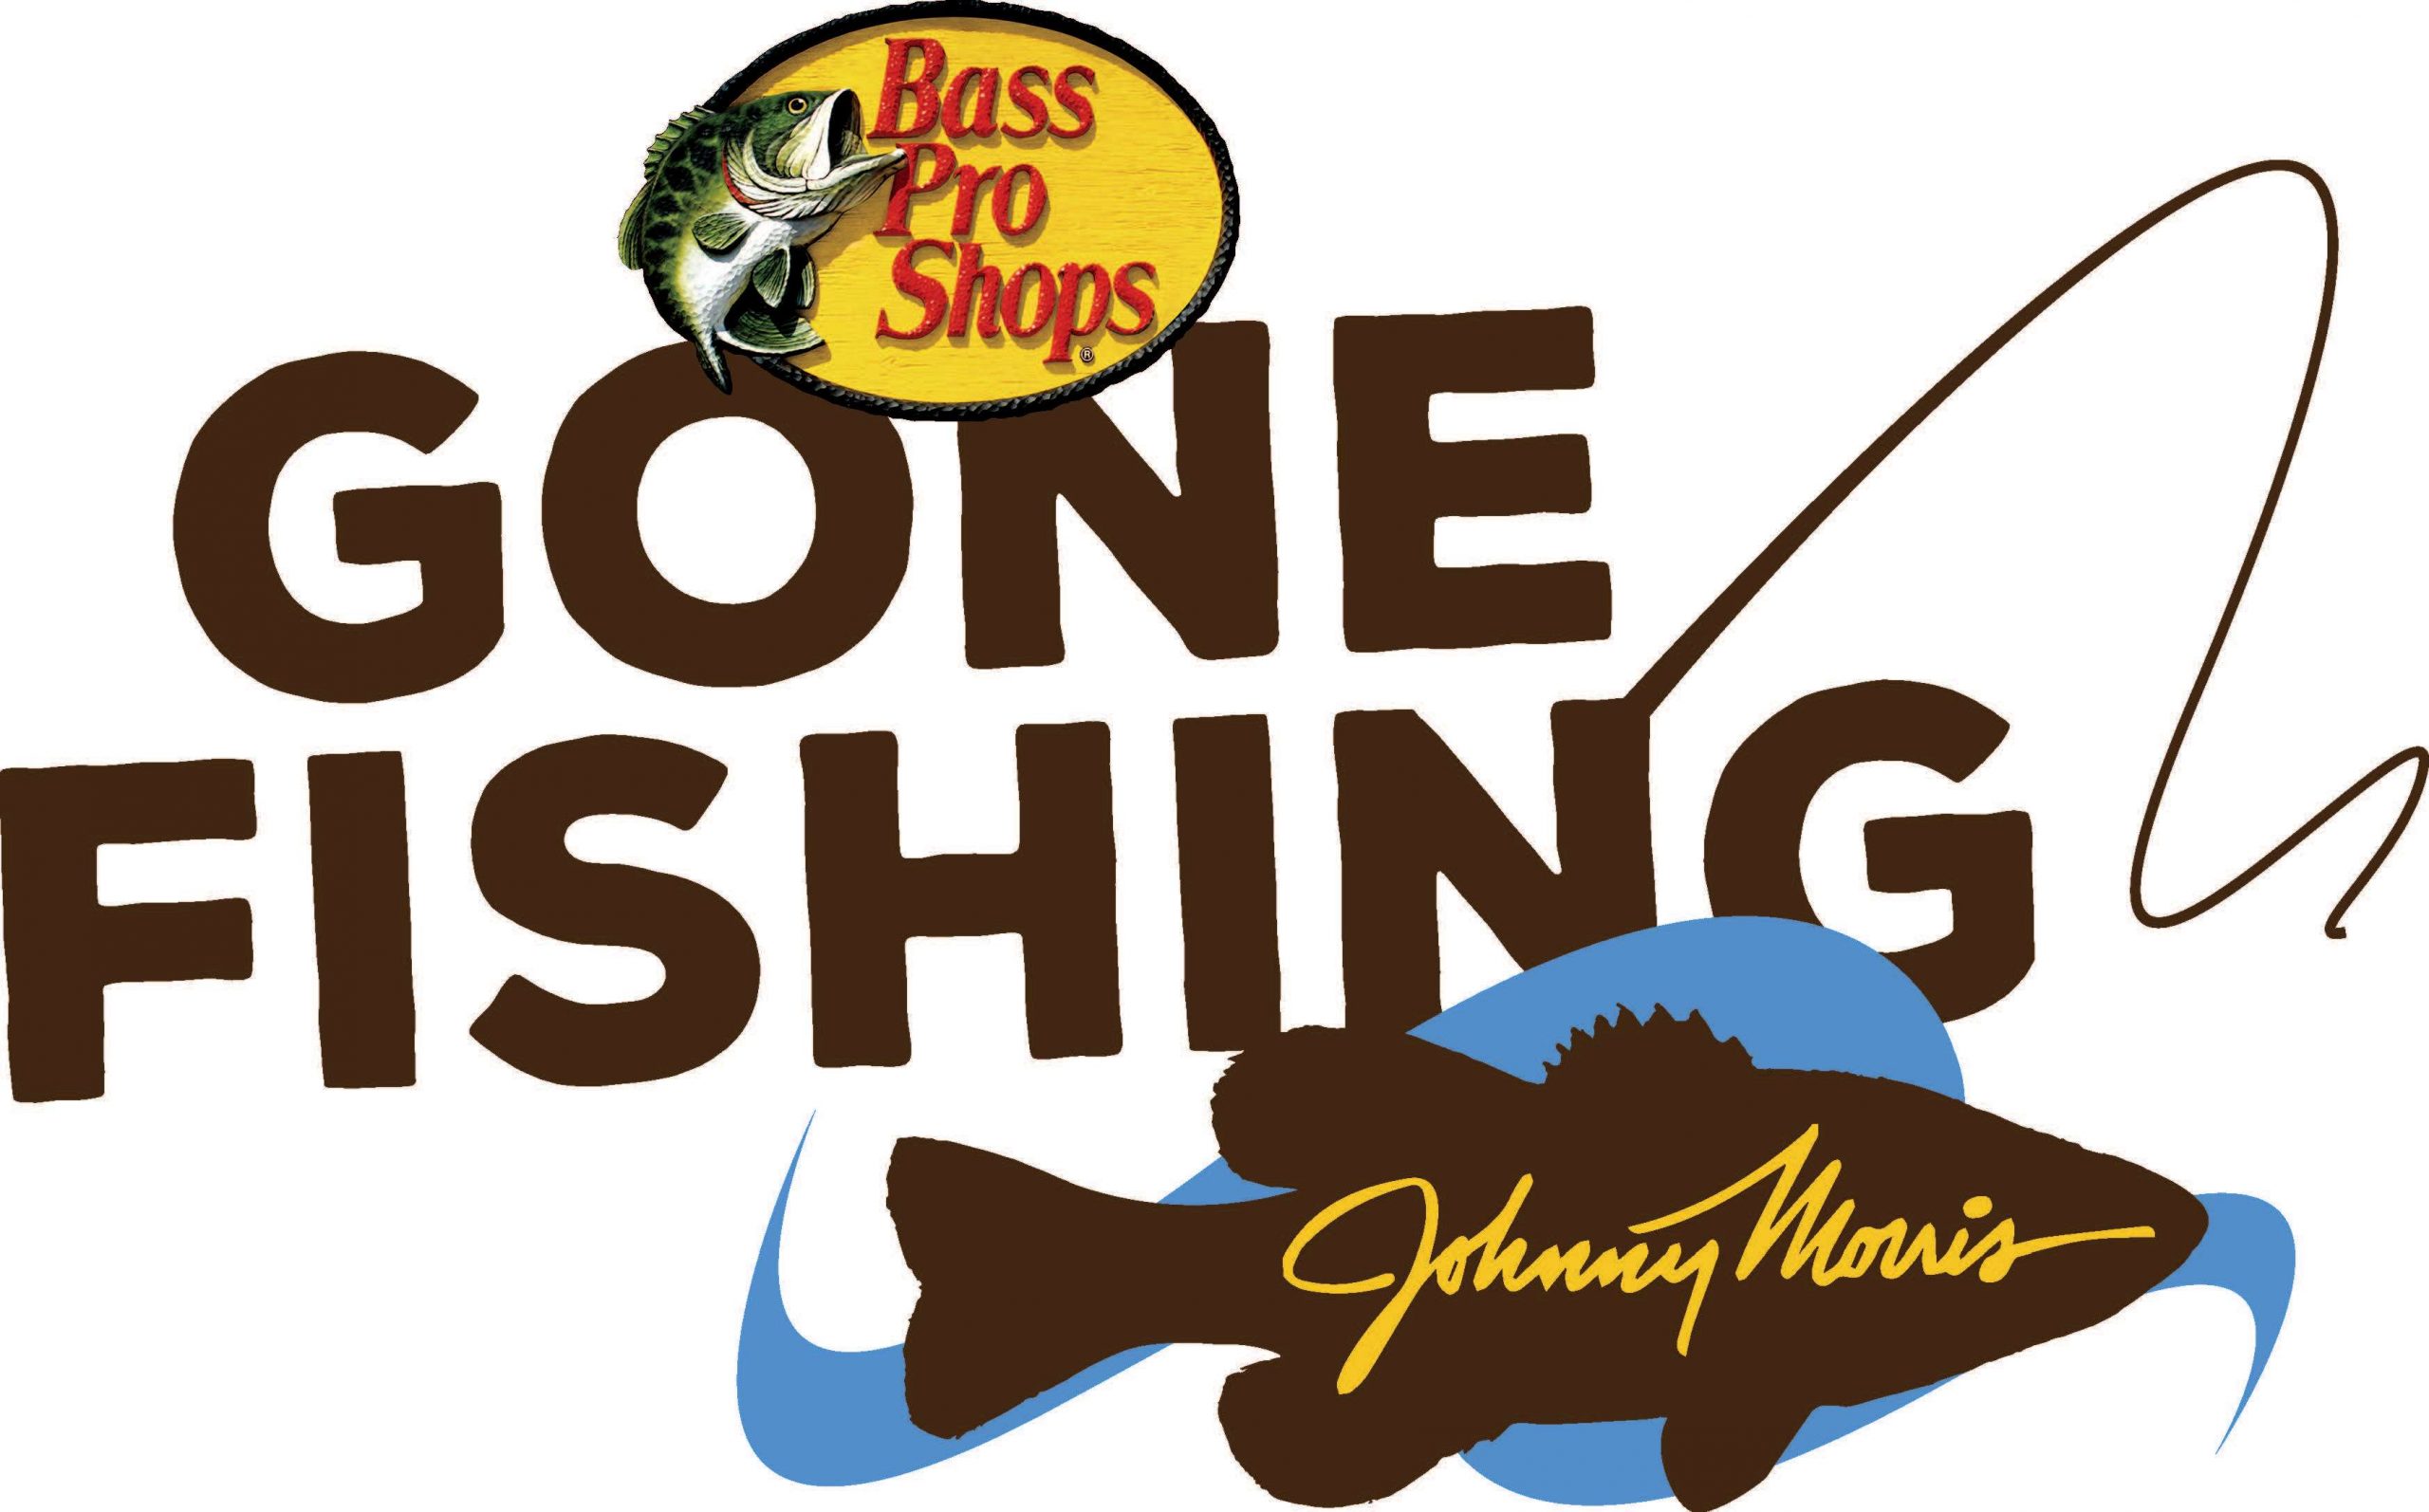 Johnny Morris and Bass Pro Shops donating 40,000 rods and reels to